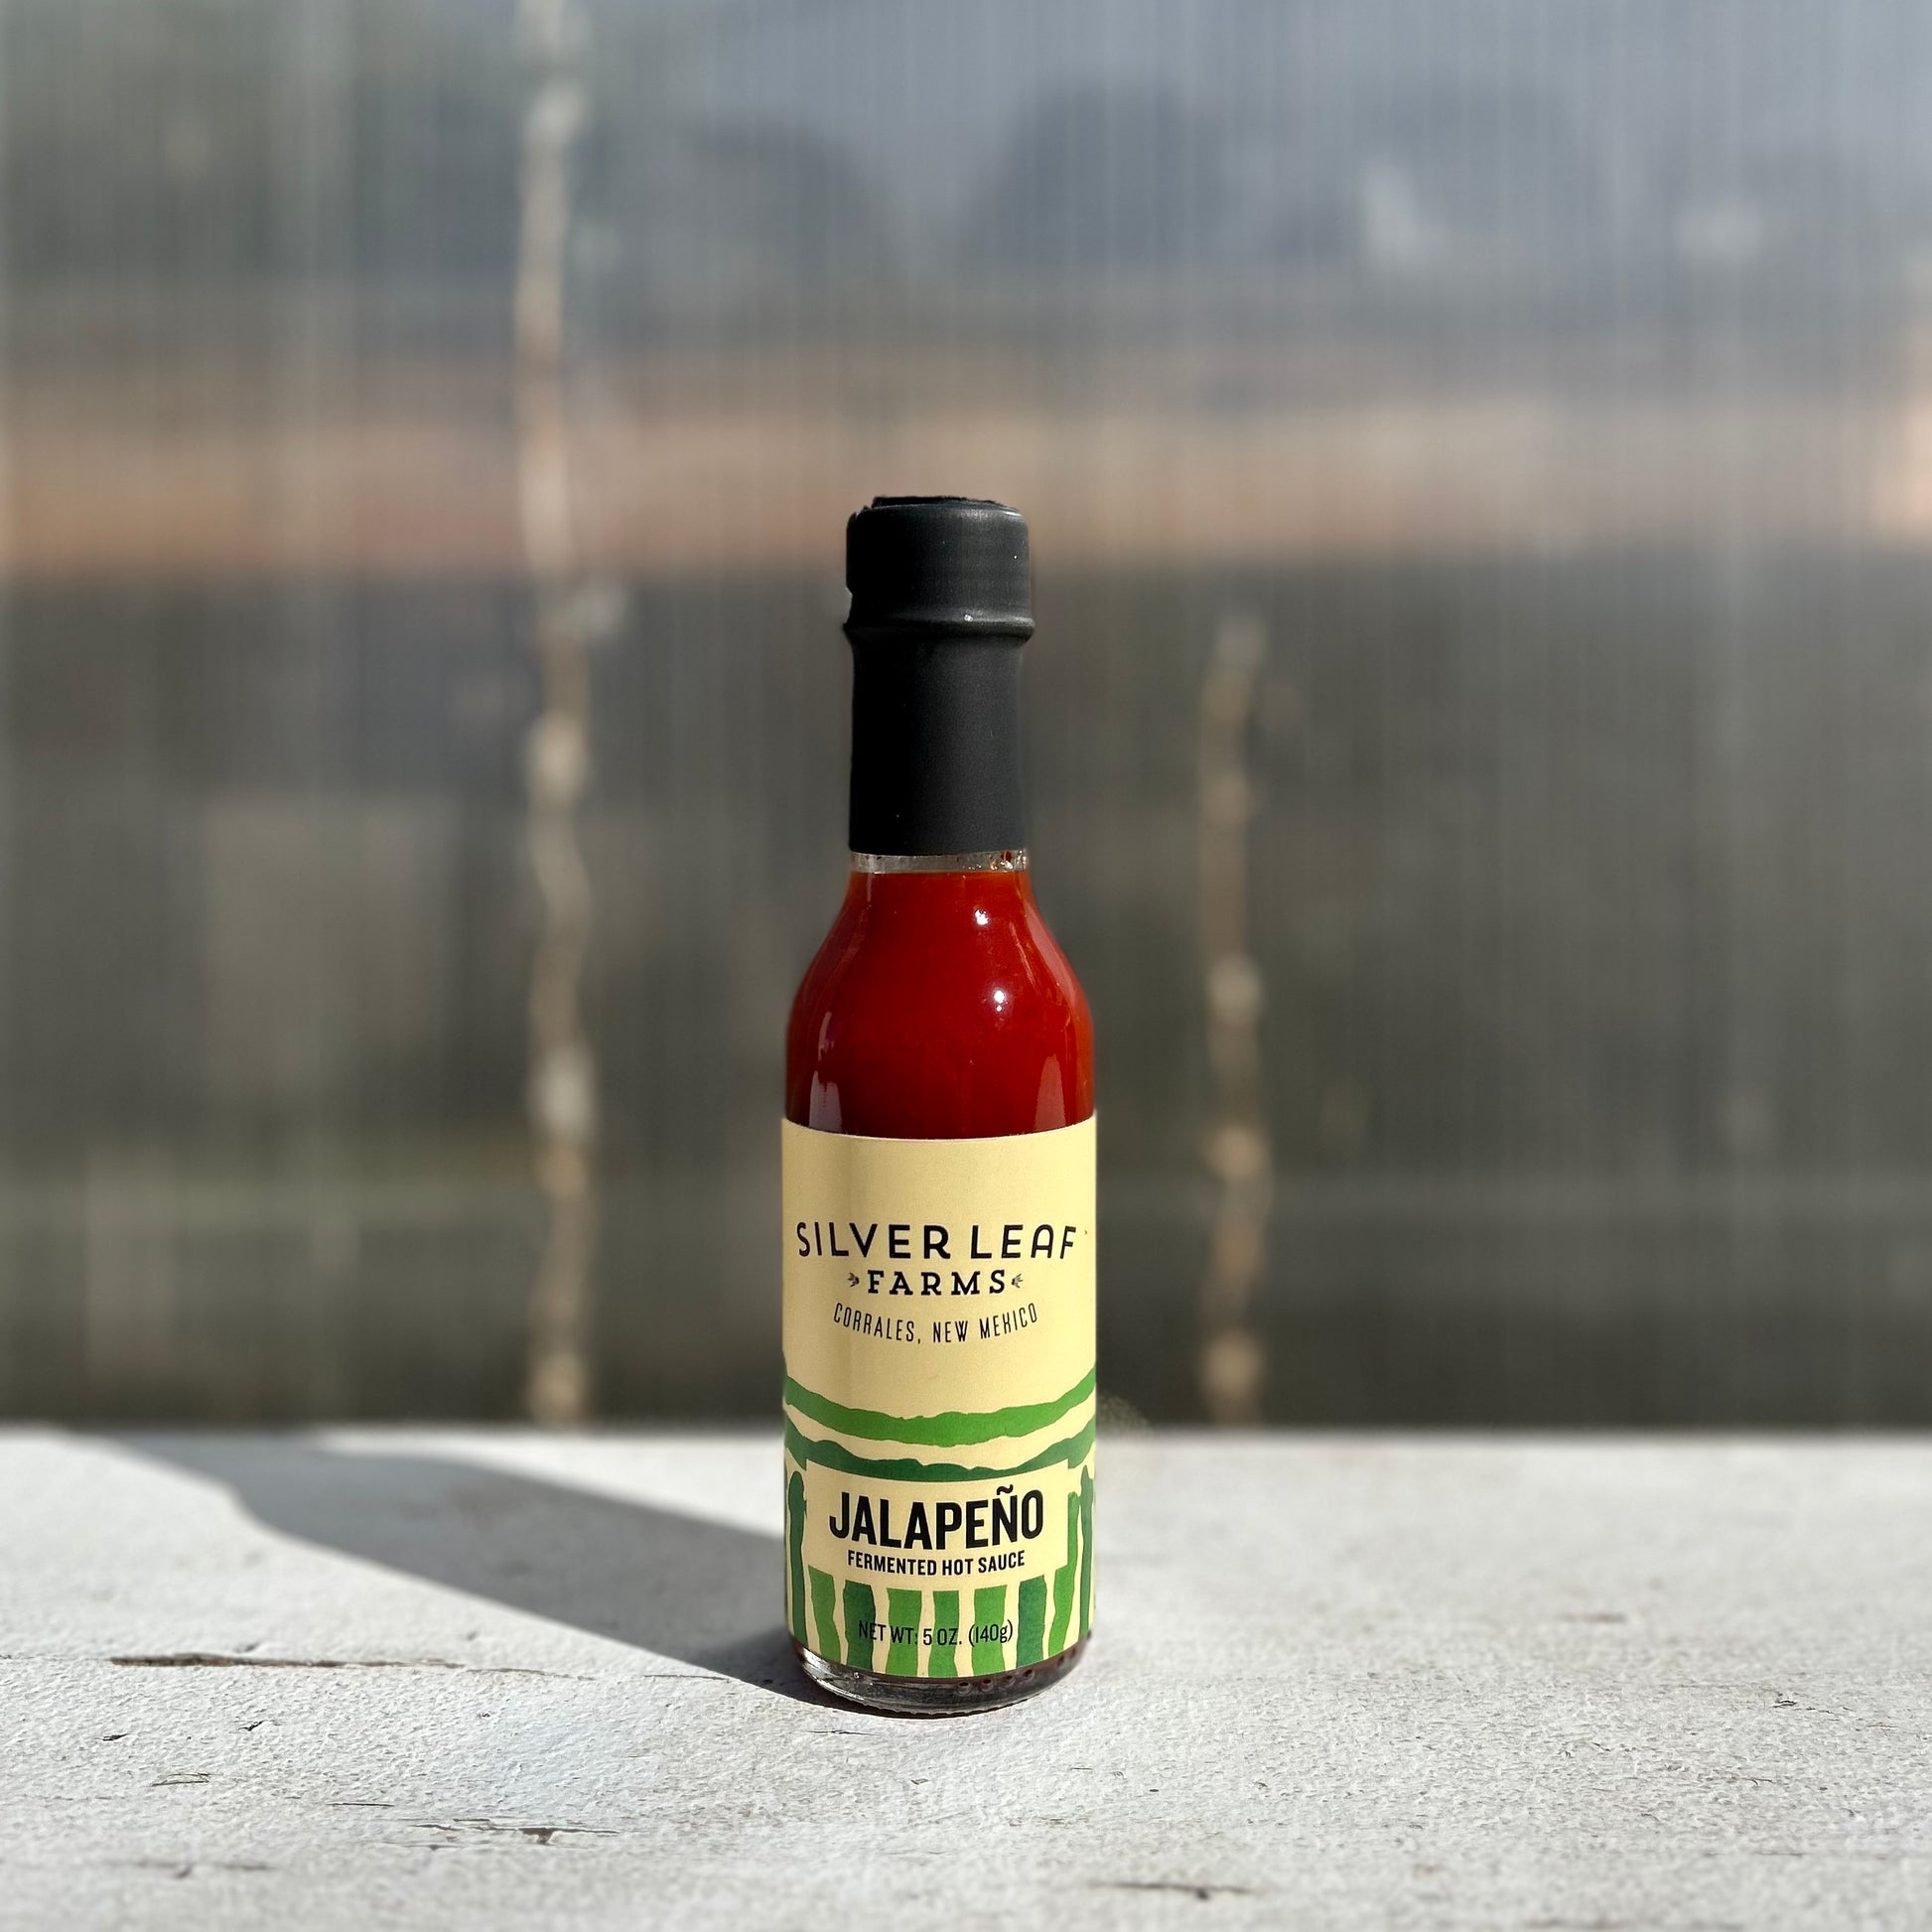 Bottle of Silver Leaf Farms Red Jalapeño Fermented Hot Sauce 